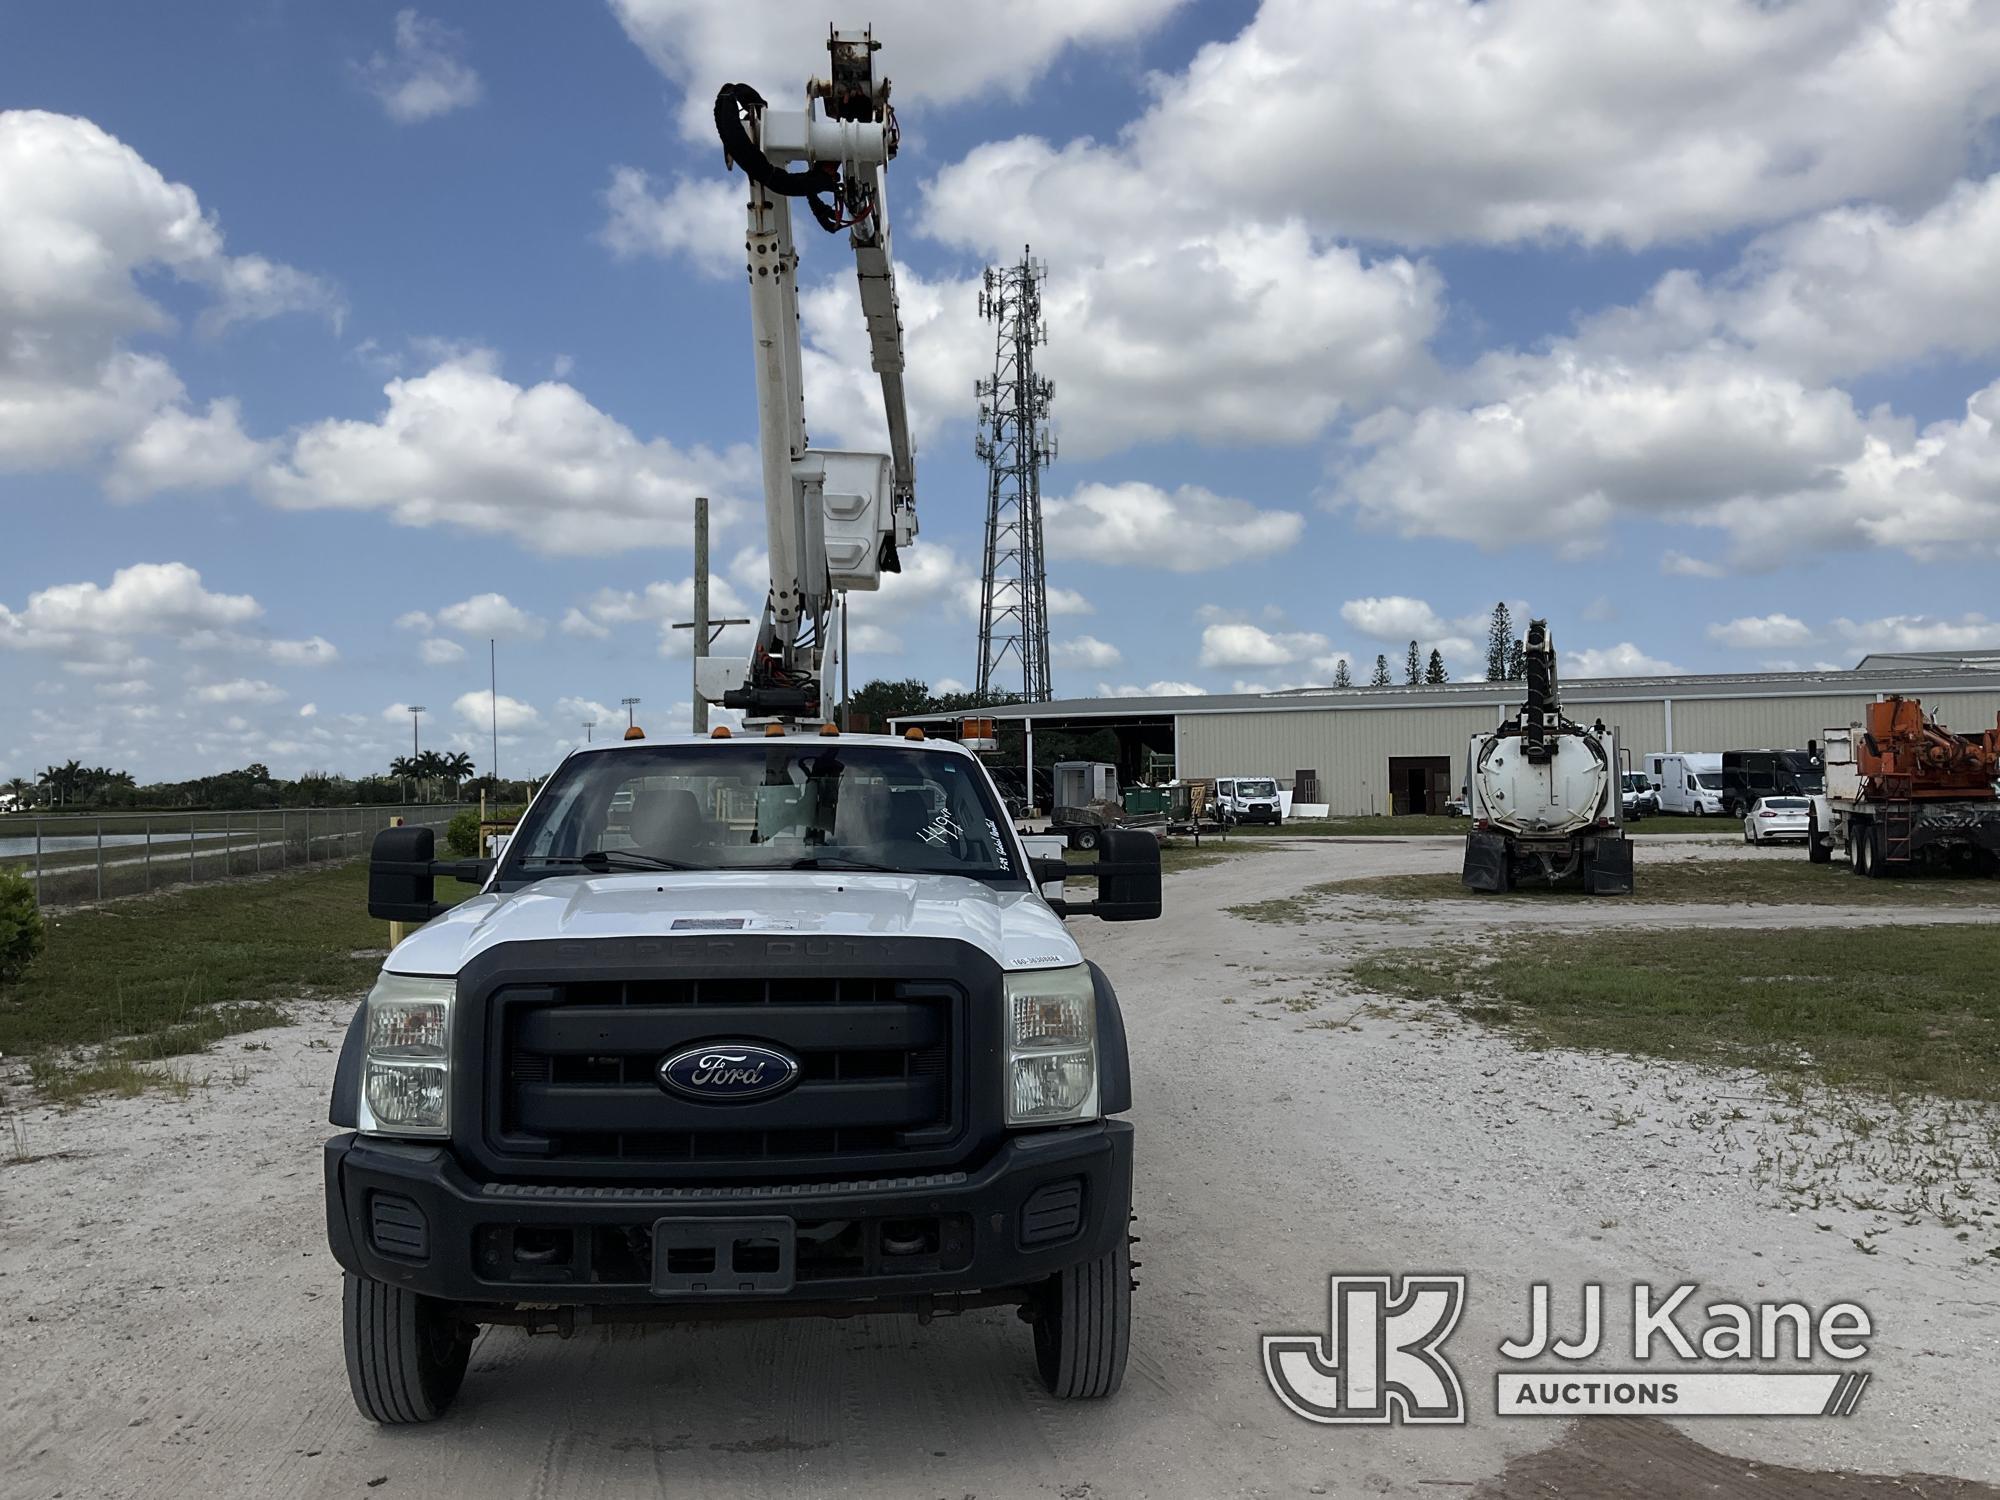 (Westlake, FL) Altec AT37G, Bucket Truck mounted behind cab on 2015 Ford F550 4x4 Flatbed/Utility Tr